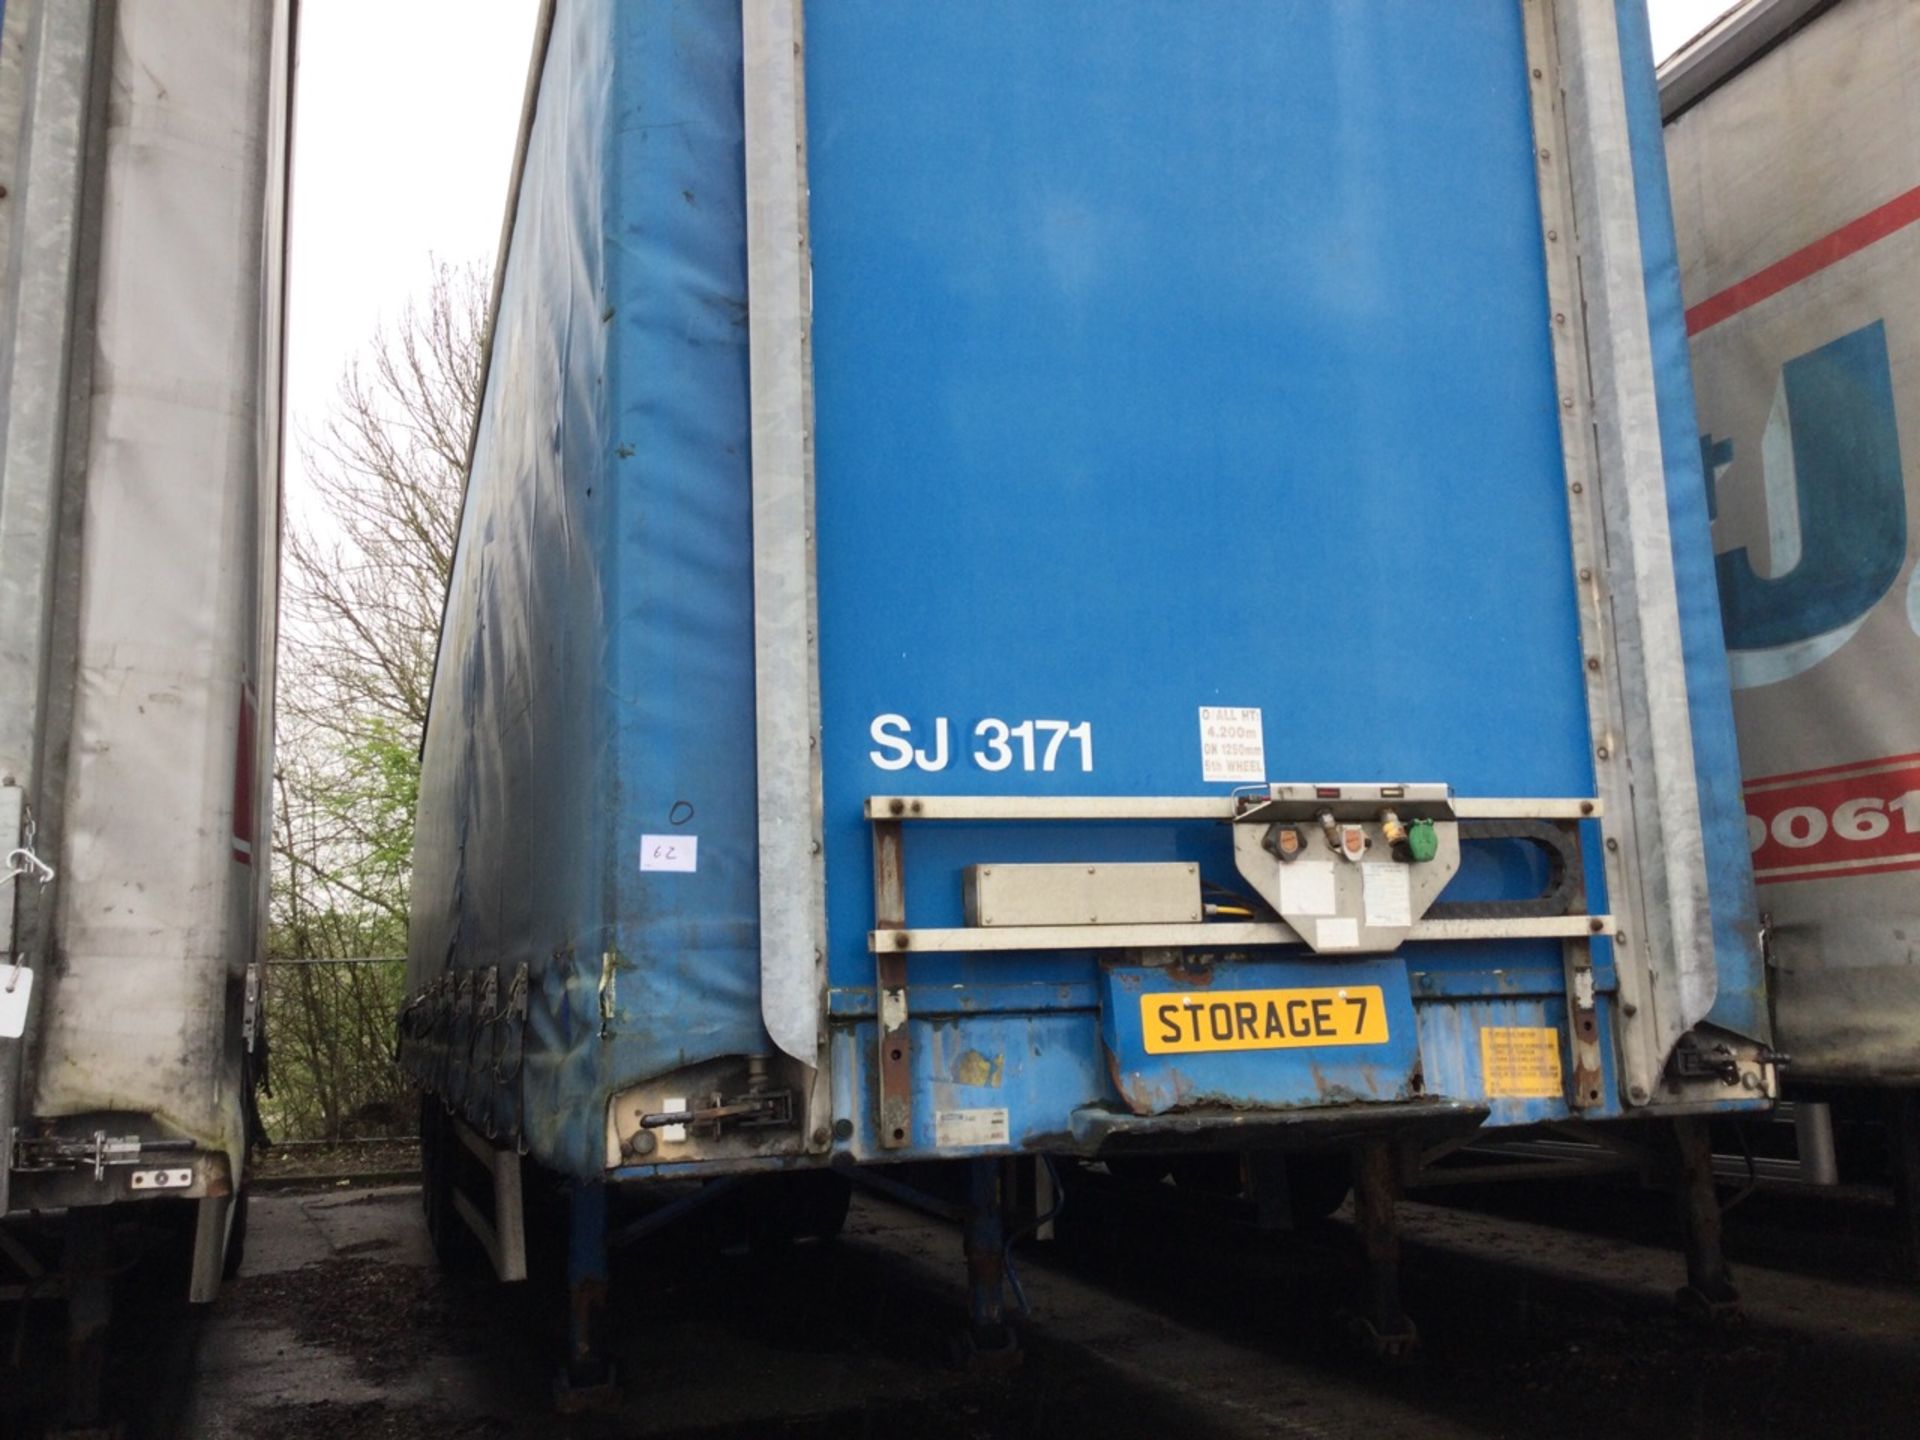 Montracon Tri-Axle 13.7m Curtainside Trailer With Air Suspension Mot Expired , serial number C14114